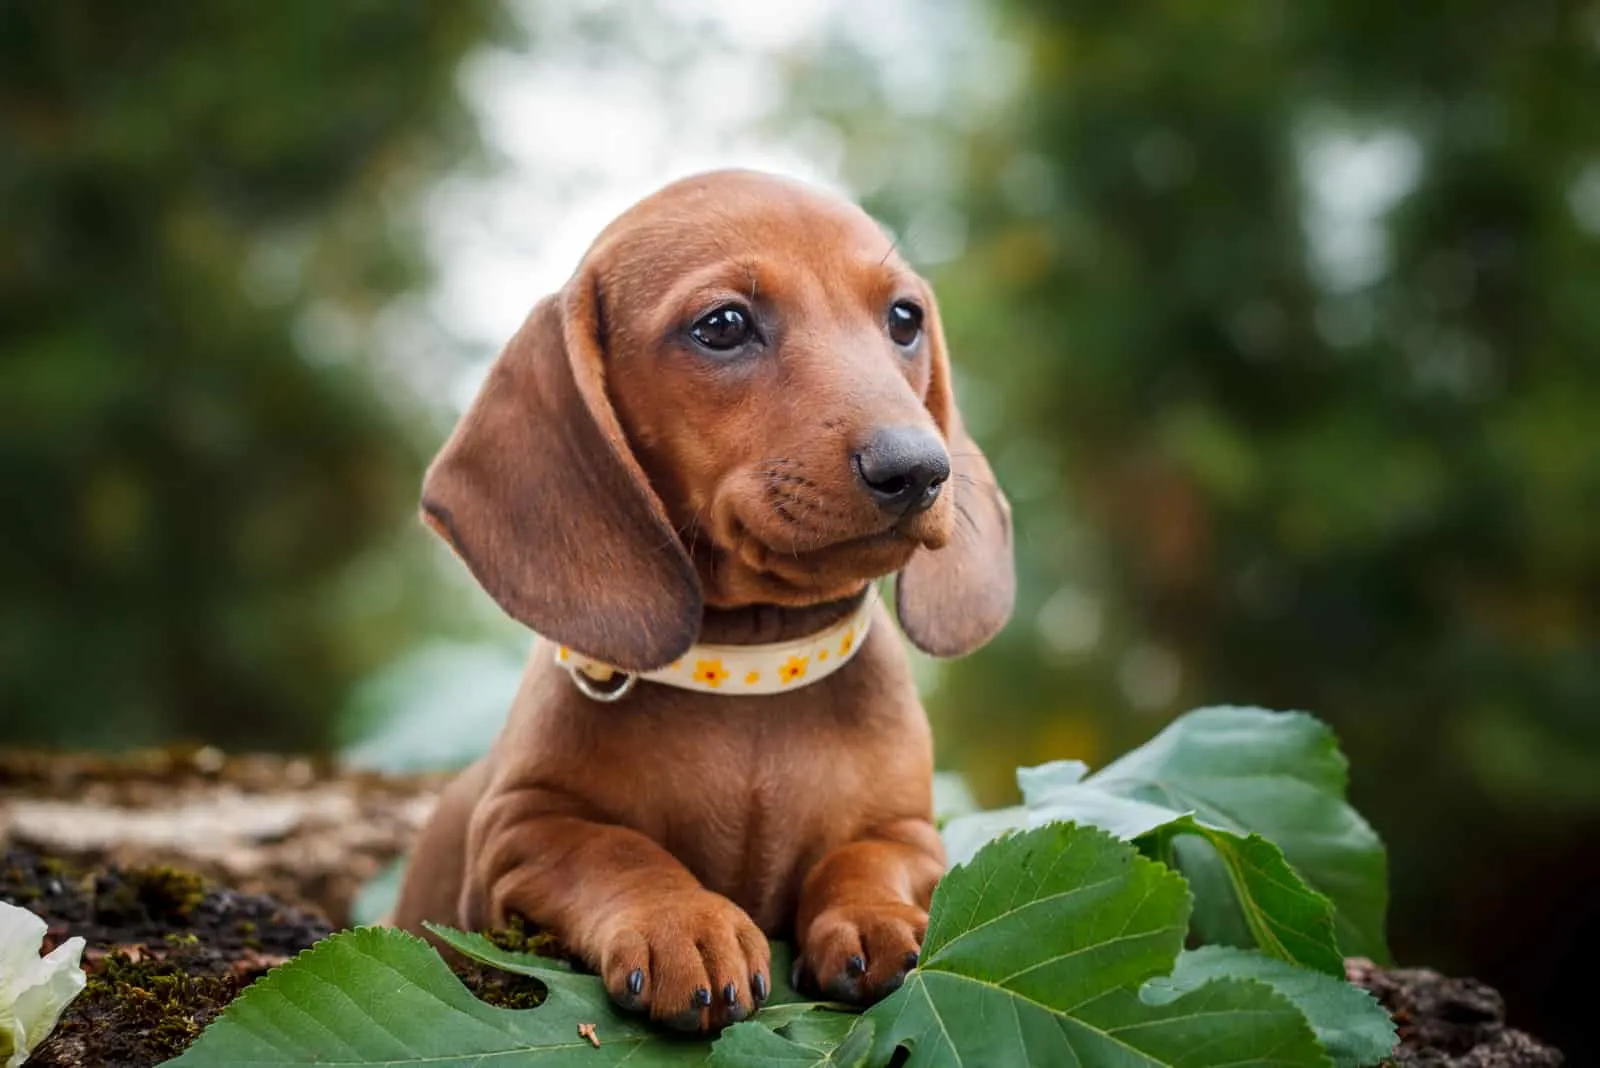 cute dachshund dog lying on the leaves in nature